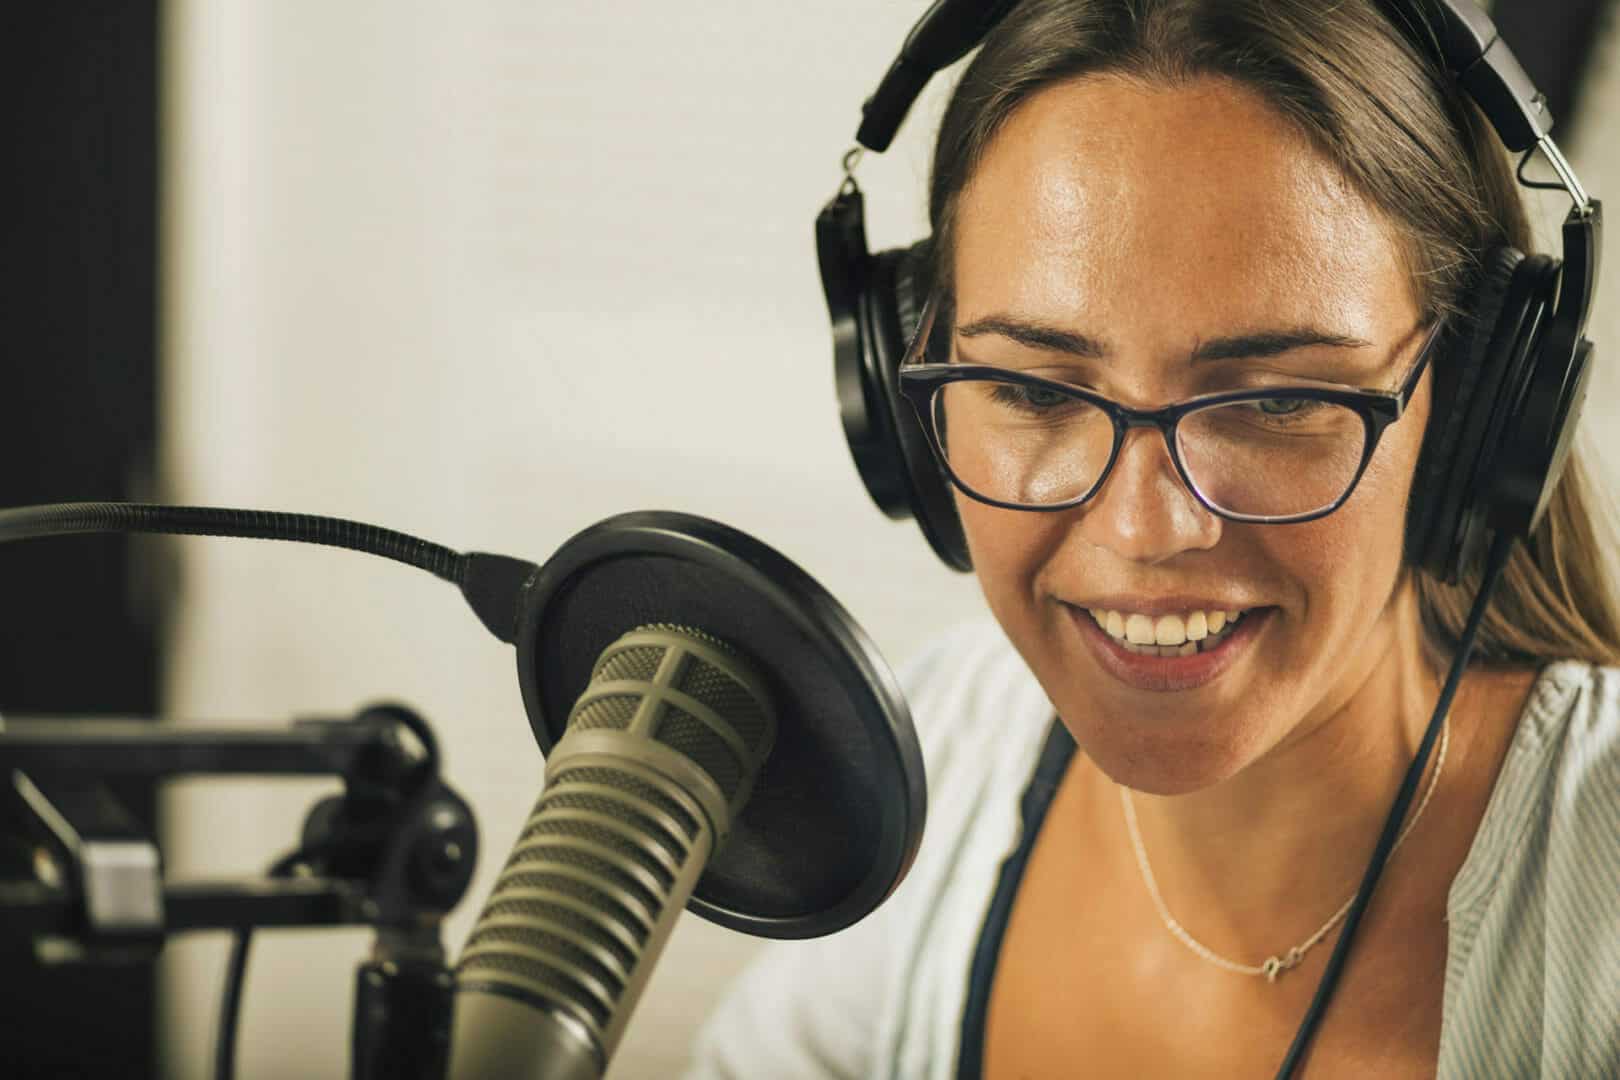 Start Using Podcasts to Market Your Business